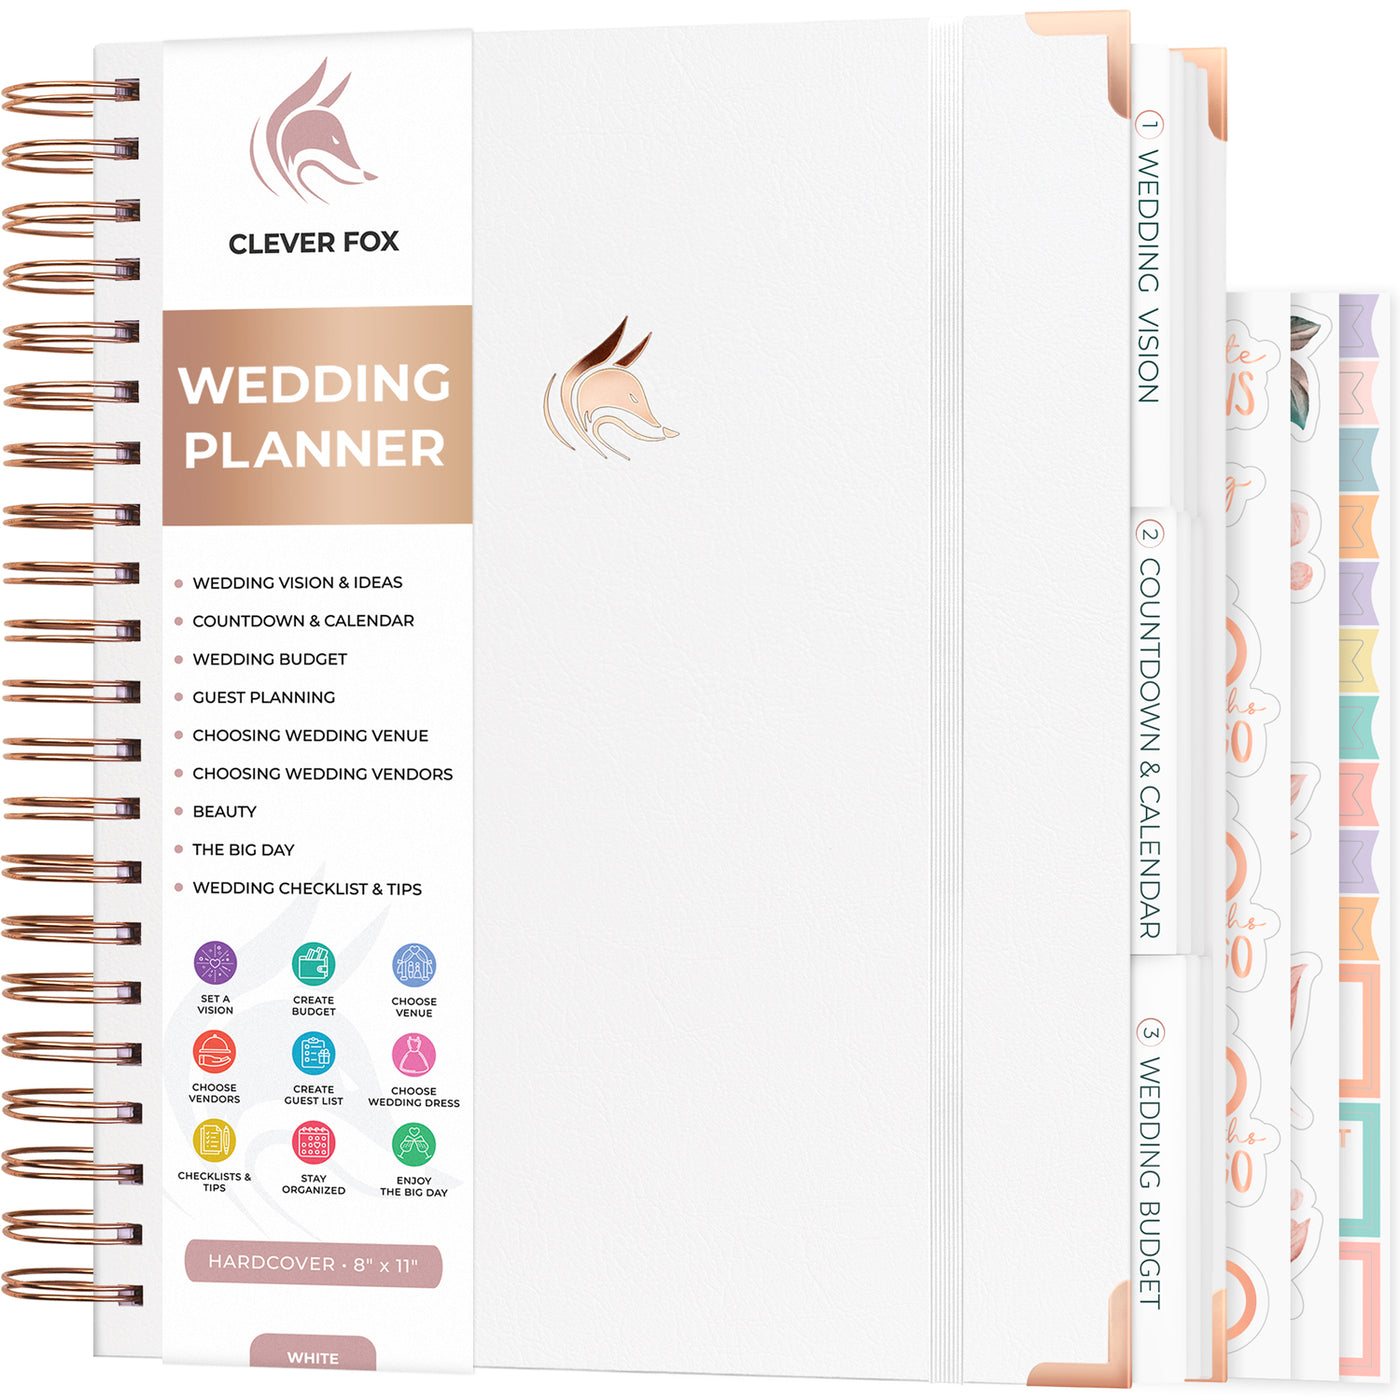 Clever Fox Wedding Planner – Clever Fox®